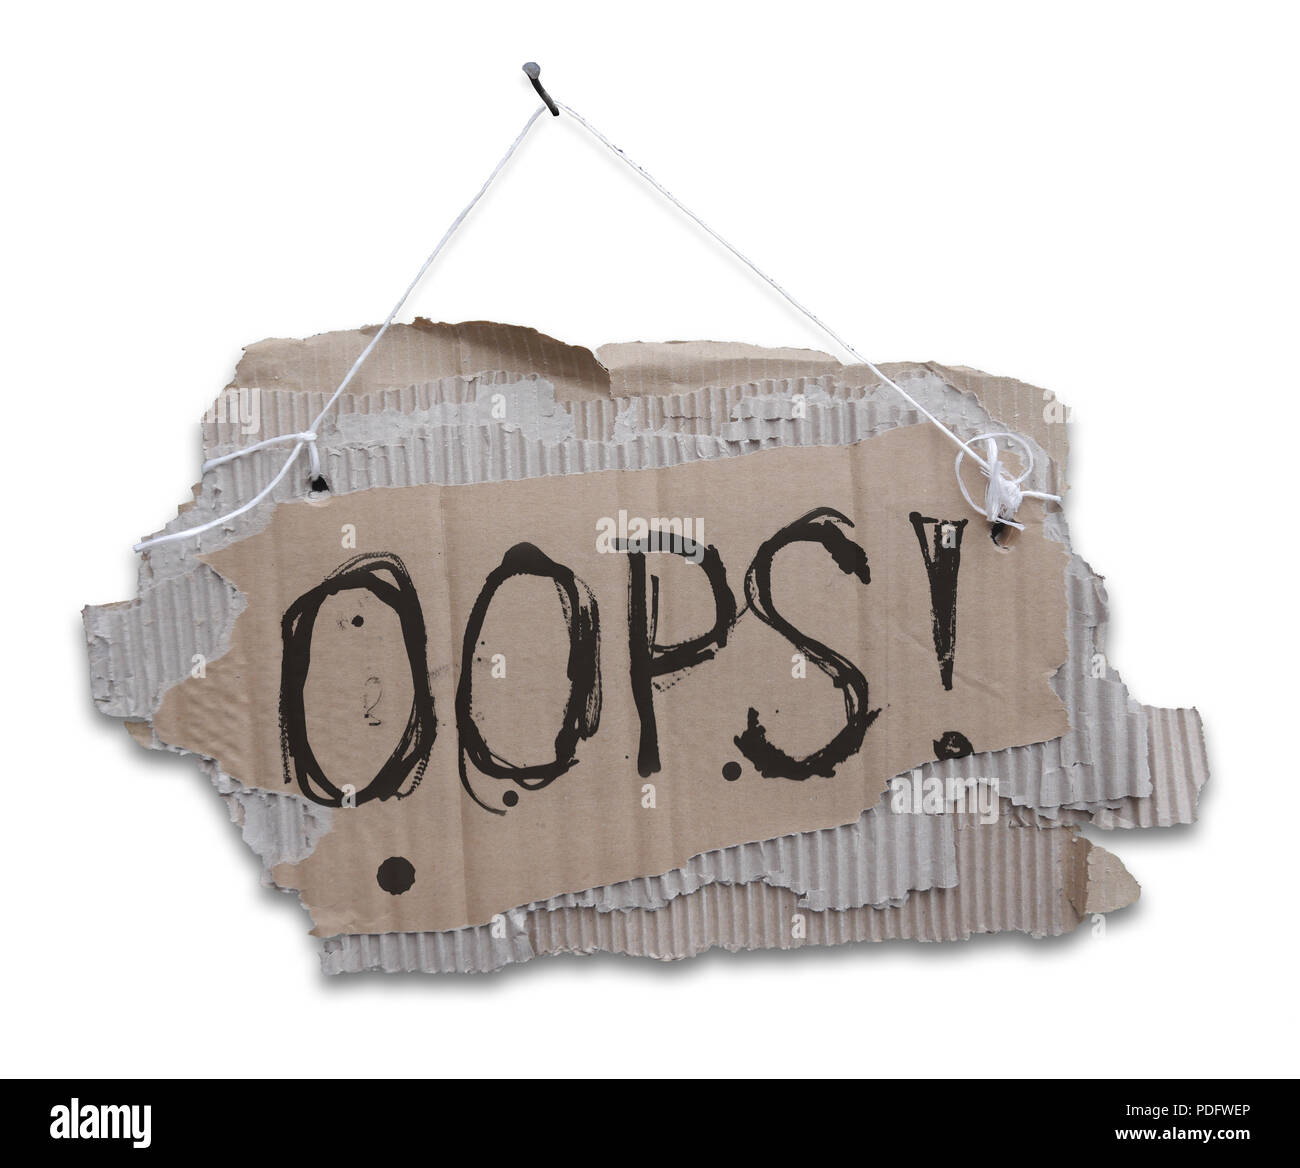 Cardboard sign on a cord with a words OOPS.  Ripped, corrugated paper hanging on cord with white sign OOPS.Isolated on white background. Stock Photo